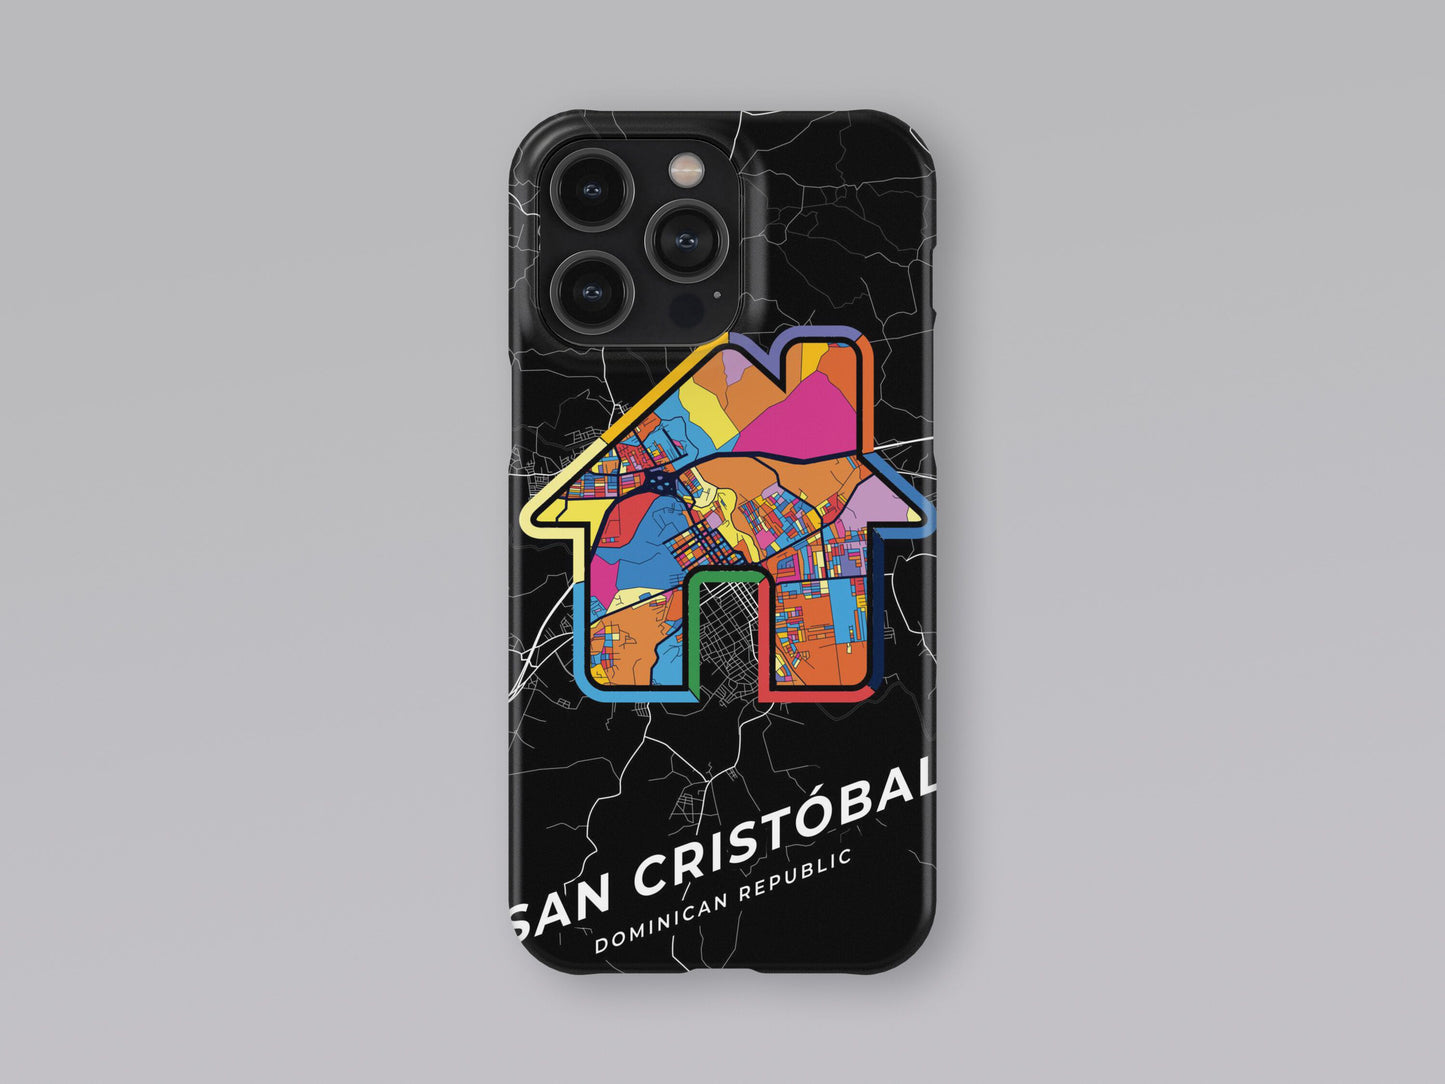 San Cristóbal Dominican Republic slim phone case with colorful icon. Birthday, wedding or housewarming gift. Couple match cases. 3